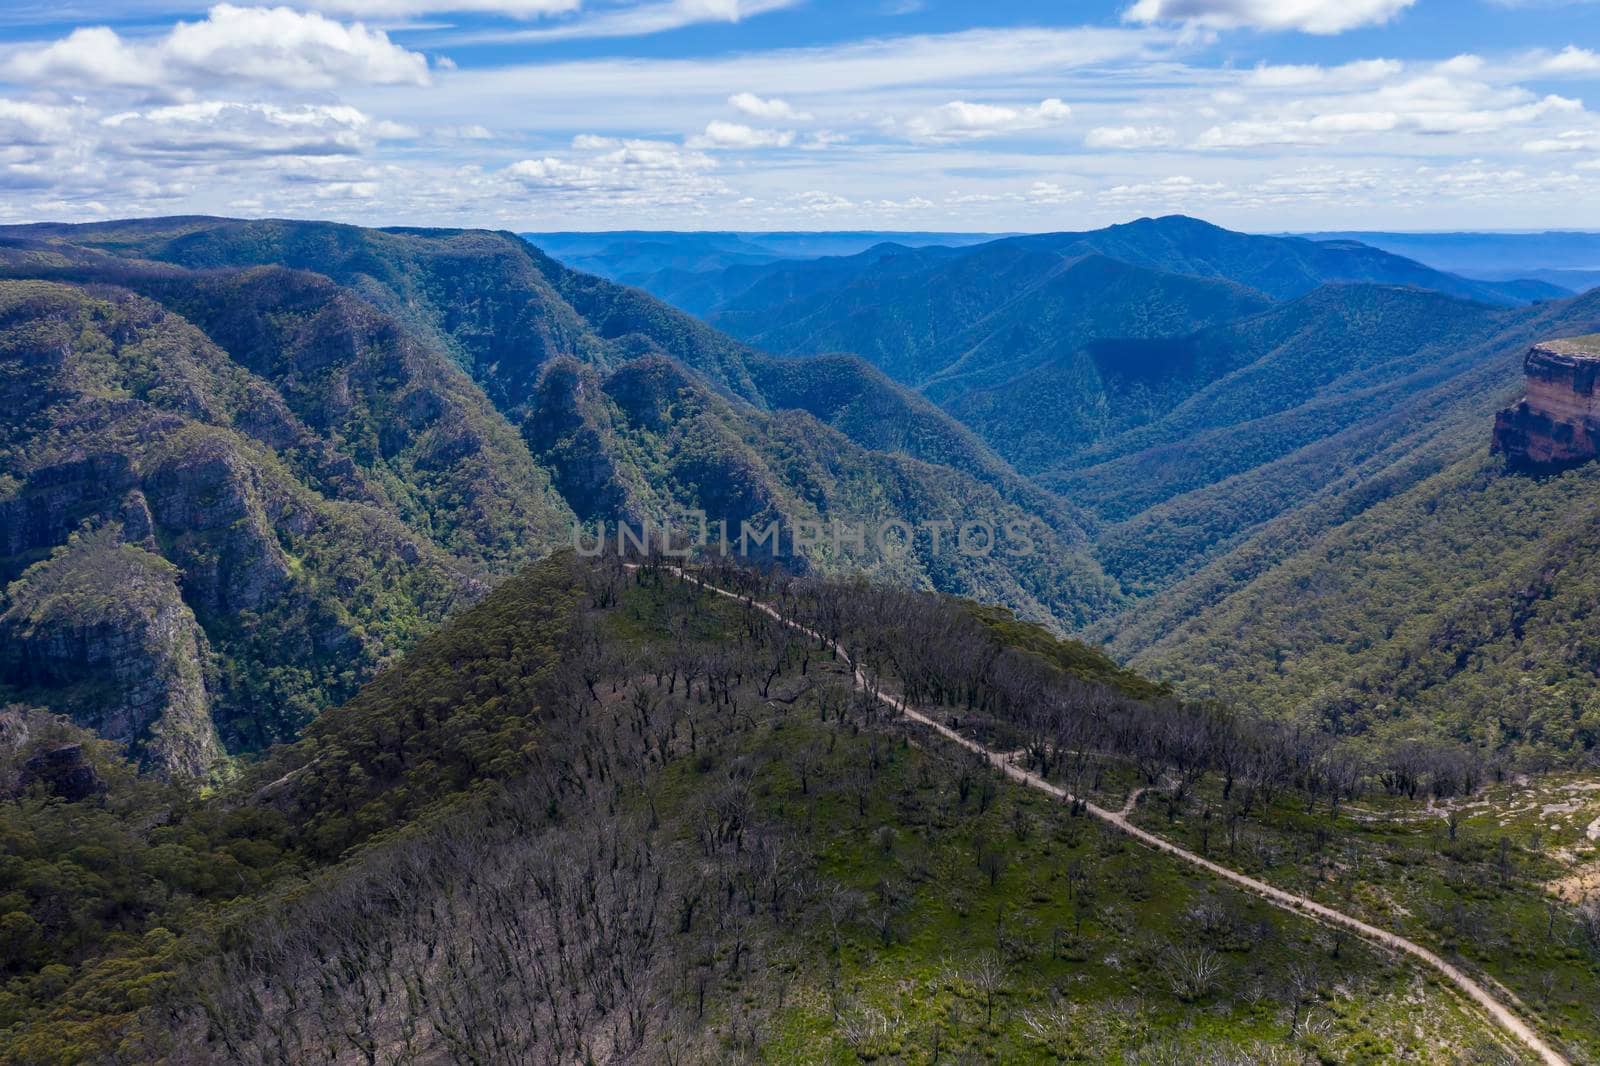 Aerial view of the valley in the Kanangra-Boyd National Park in the Central Tablelands in regional New South Wales Australia